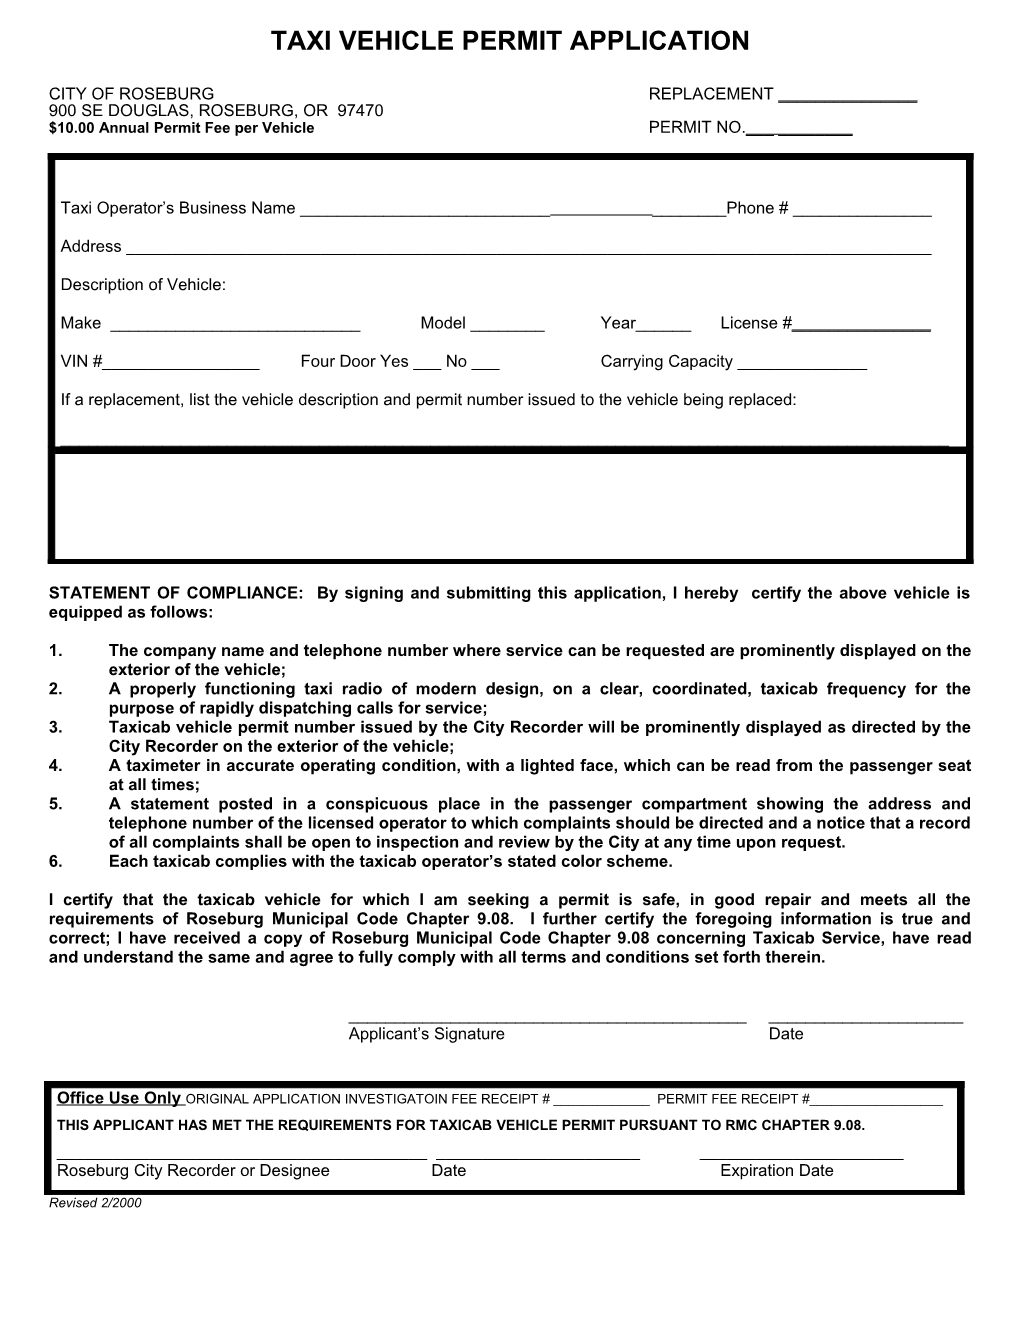 Taxi Vehicle Permit Application